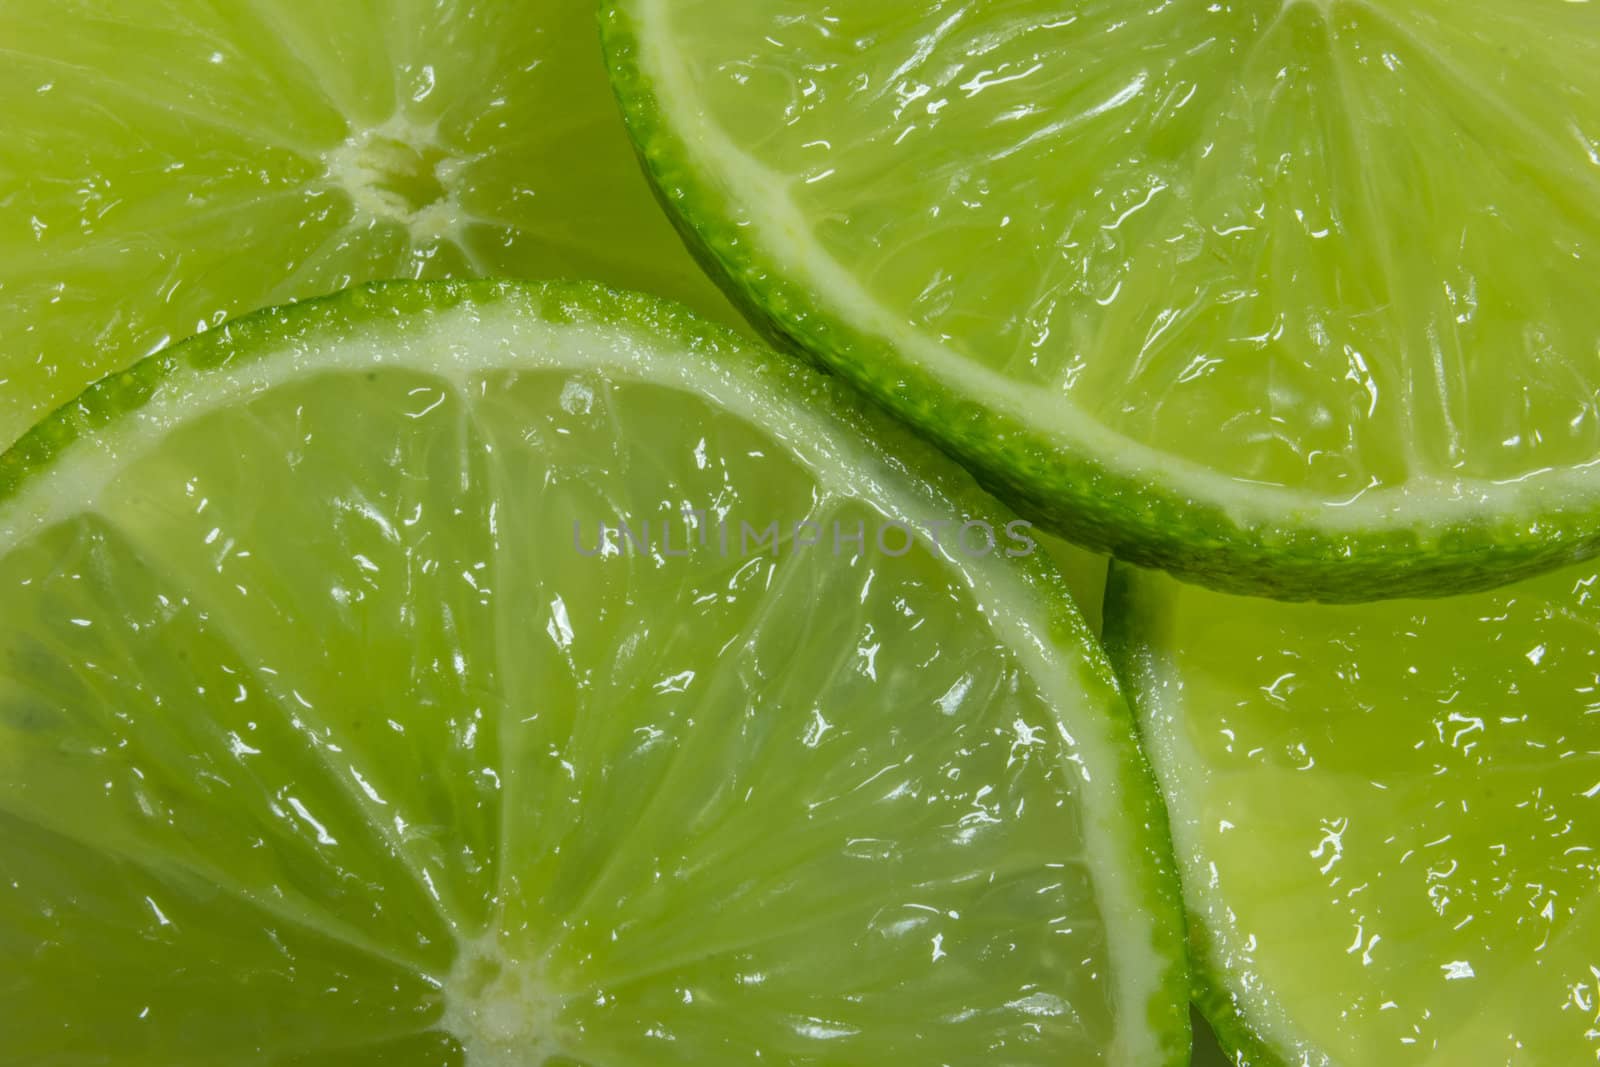 Close-up of lime